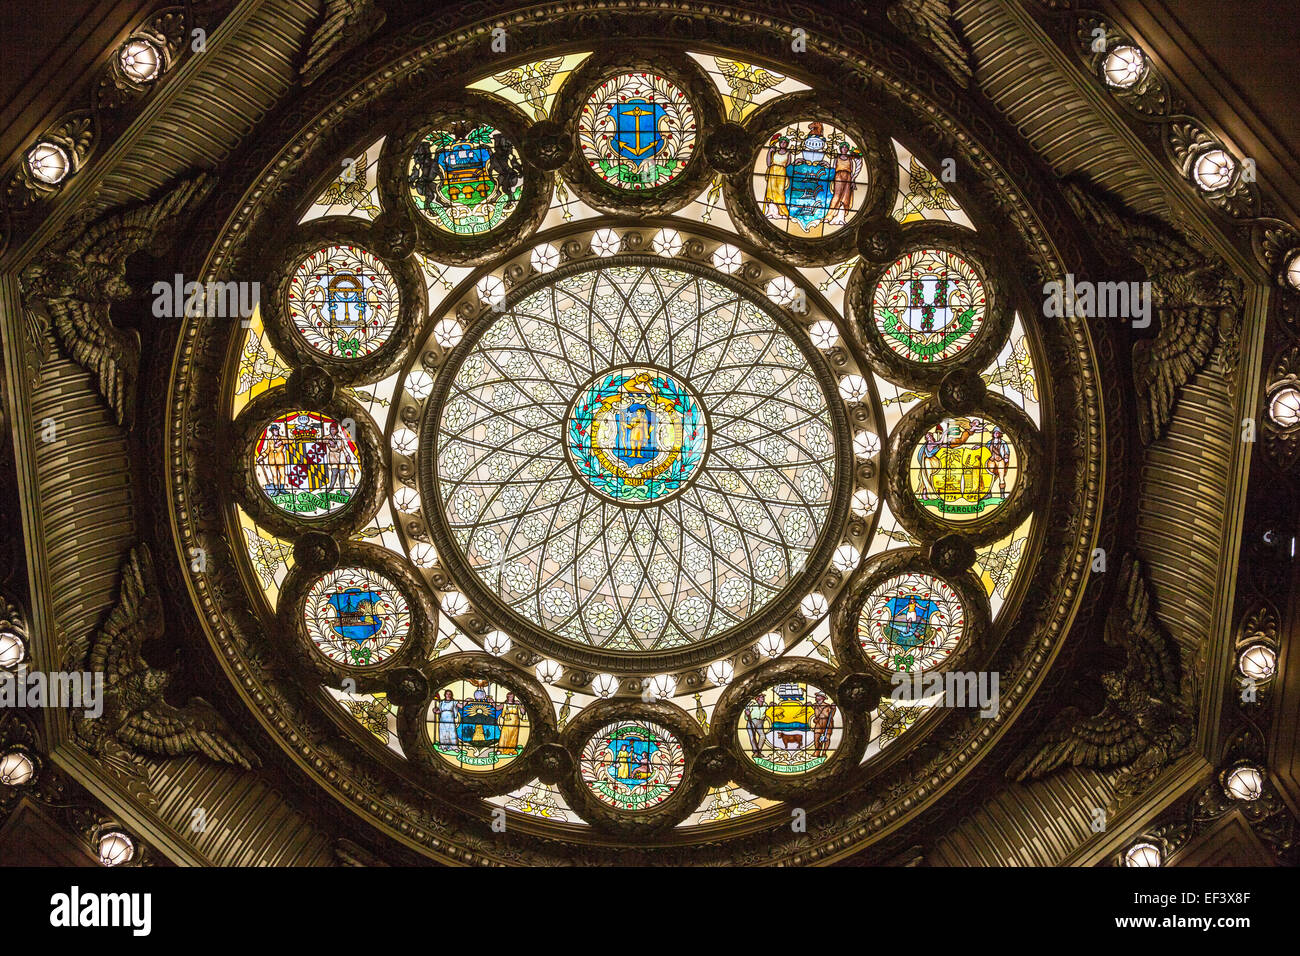 Stained glass skylight depicting seals of original 13 colonies, Hall of Flags, Massachusetts State House, Boston, USA Stock Photo